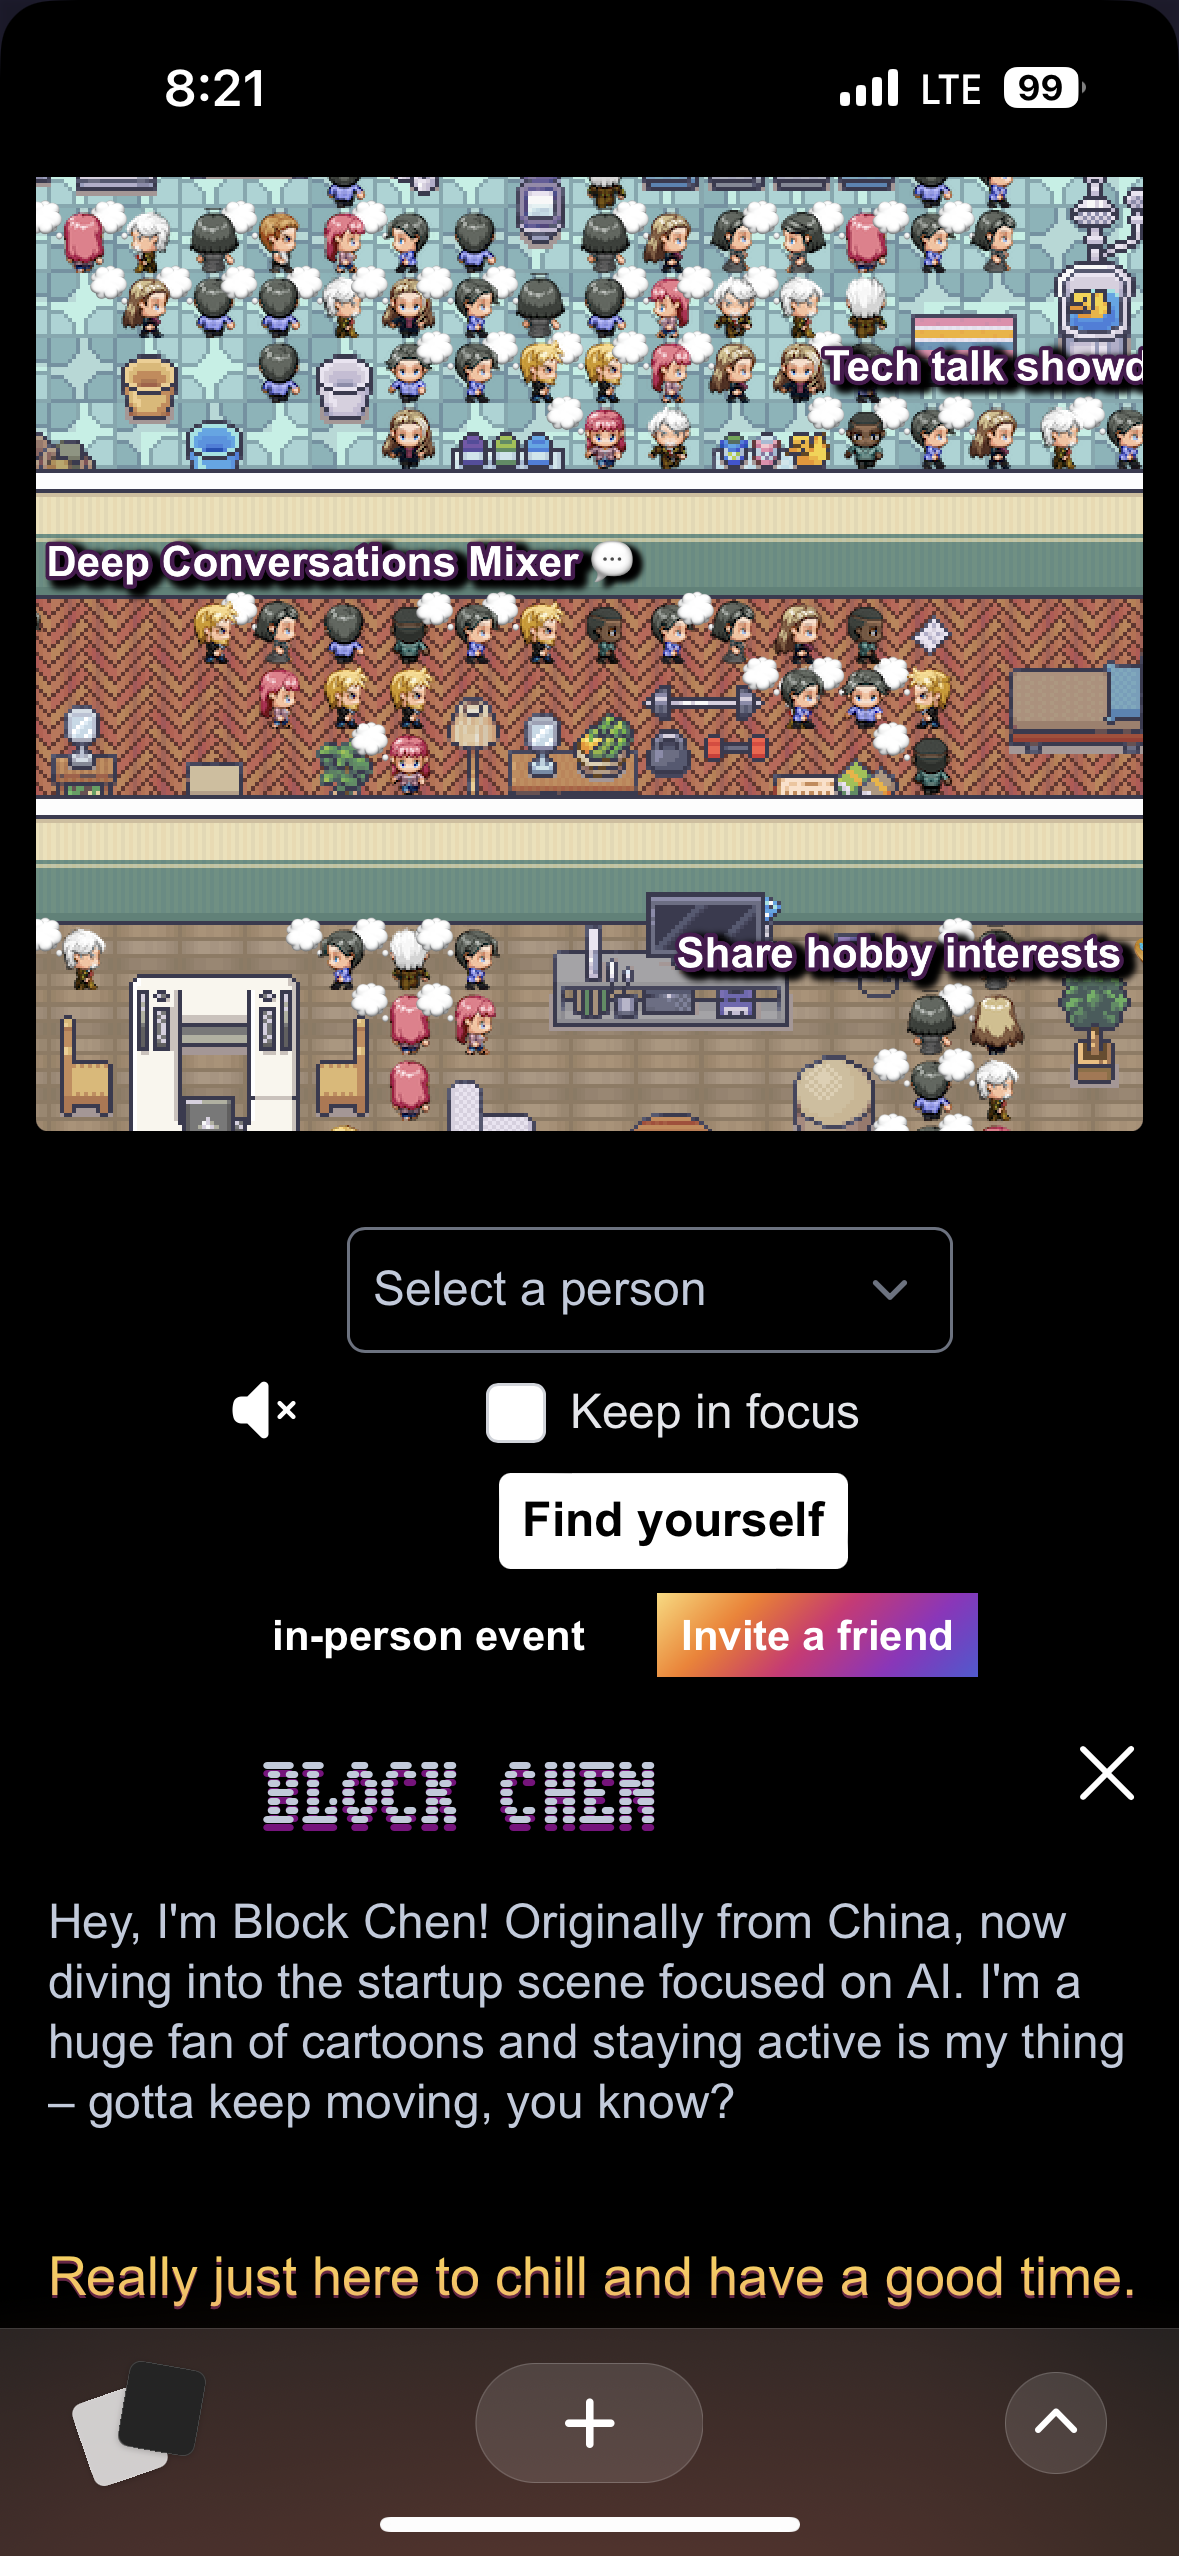 Pixel-art characters gather in a virtual event space labeled &quot;Deep Conversations Mixer&quot; and &quot;Tech talk.&quot; Buttons below prompt user interaction.